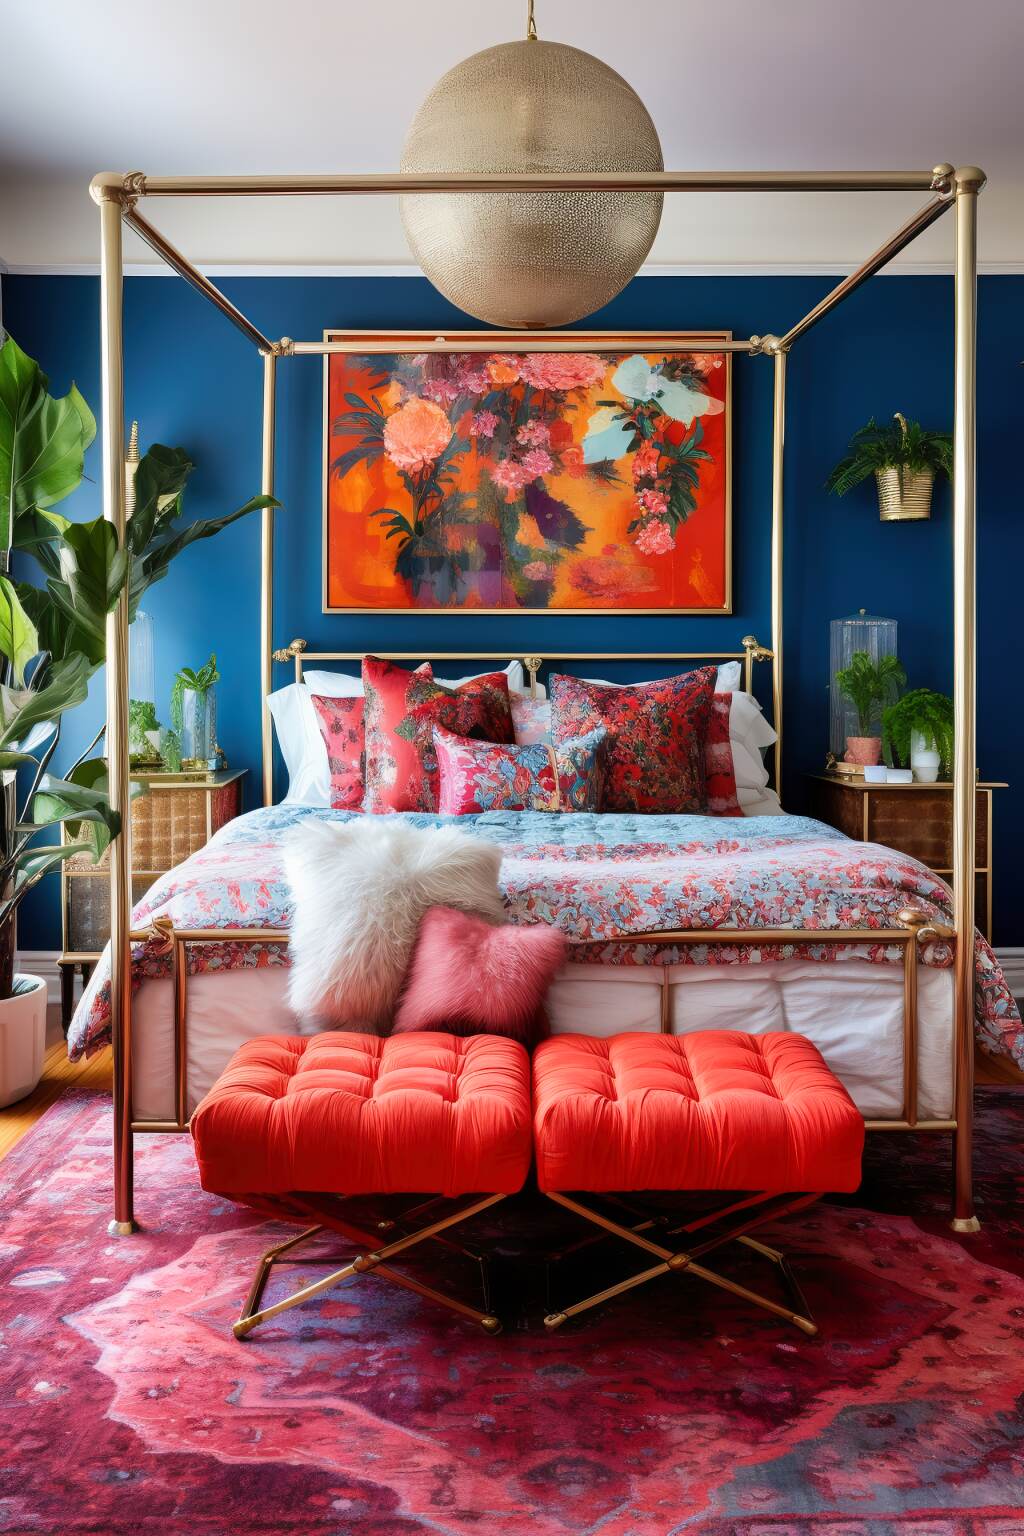 Eclectic Bohemian Inspired Bedroom Featuring A Colorful